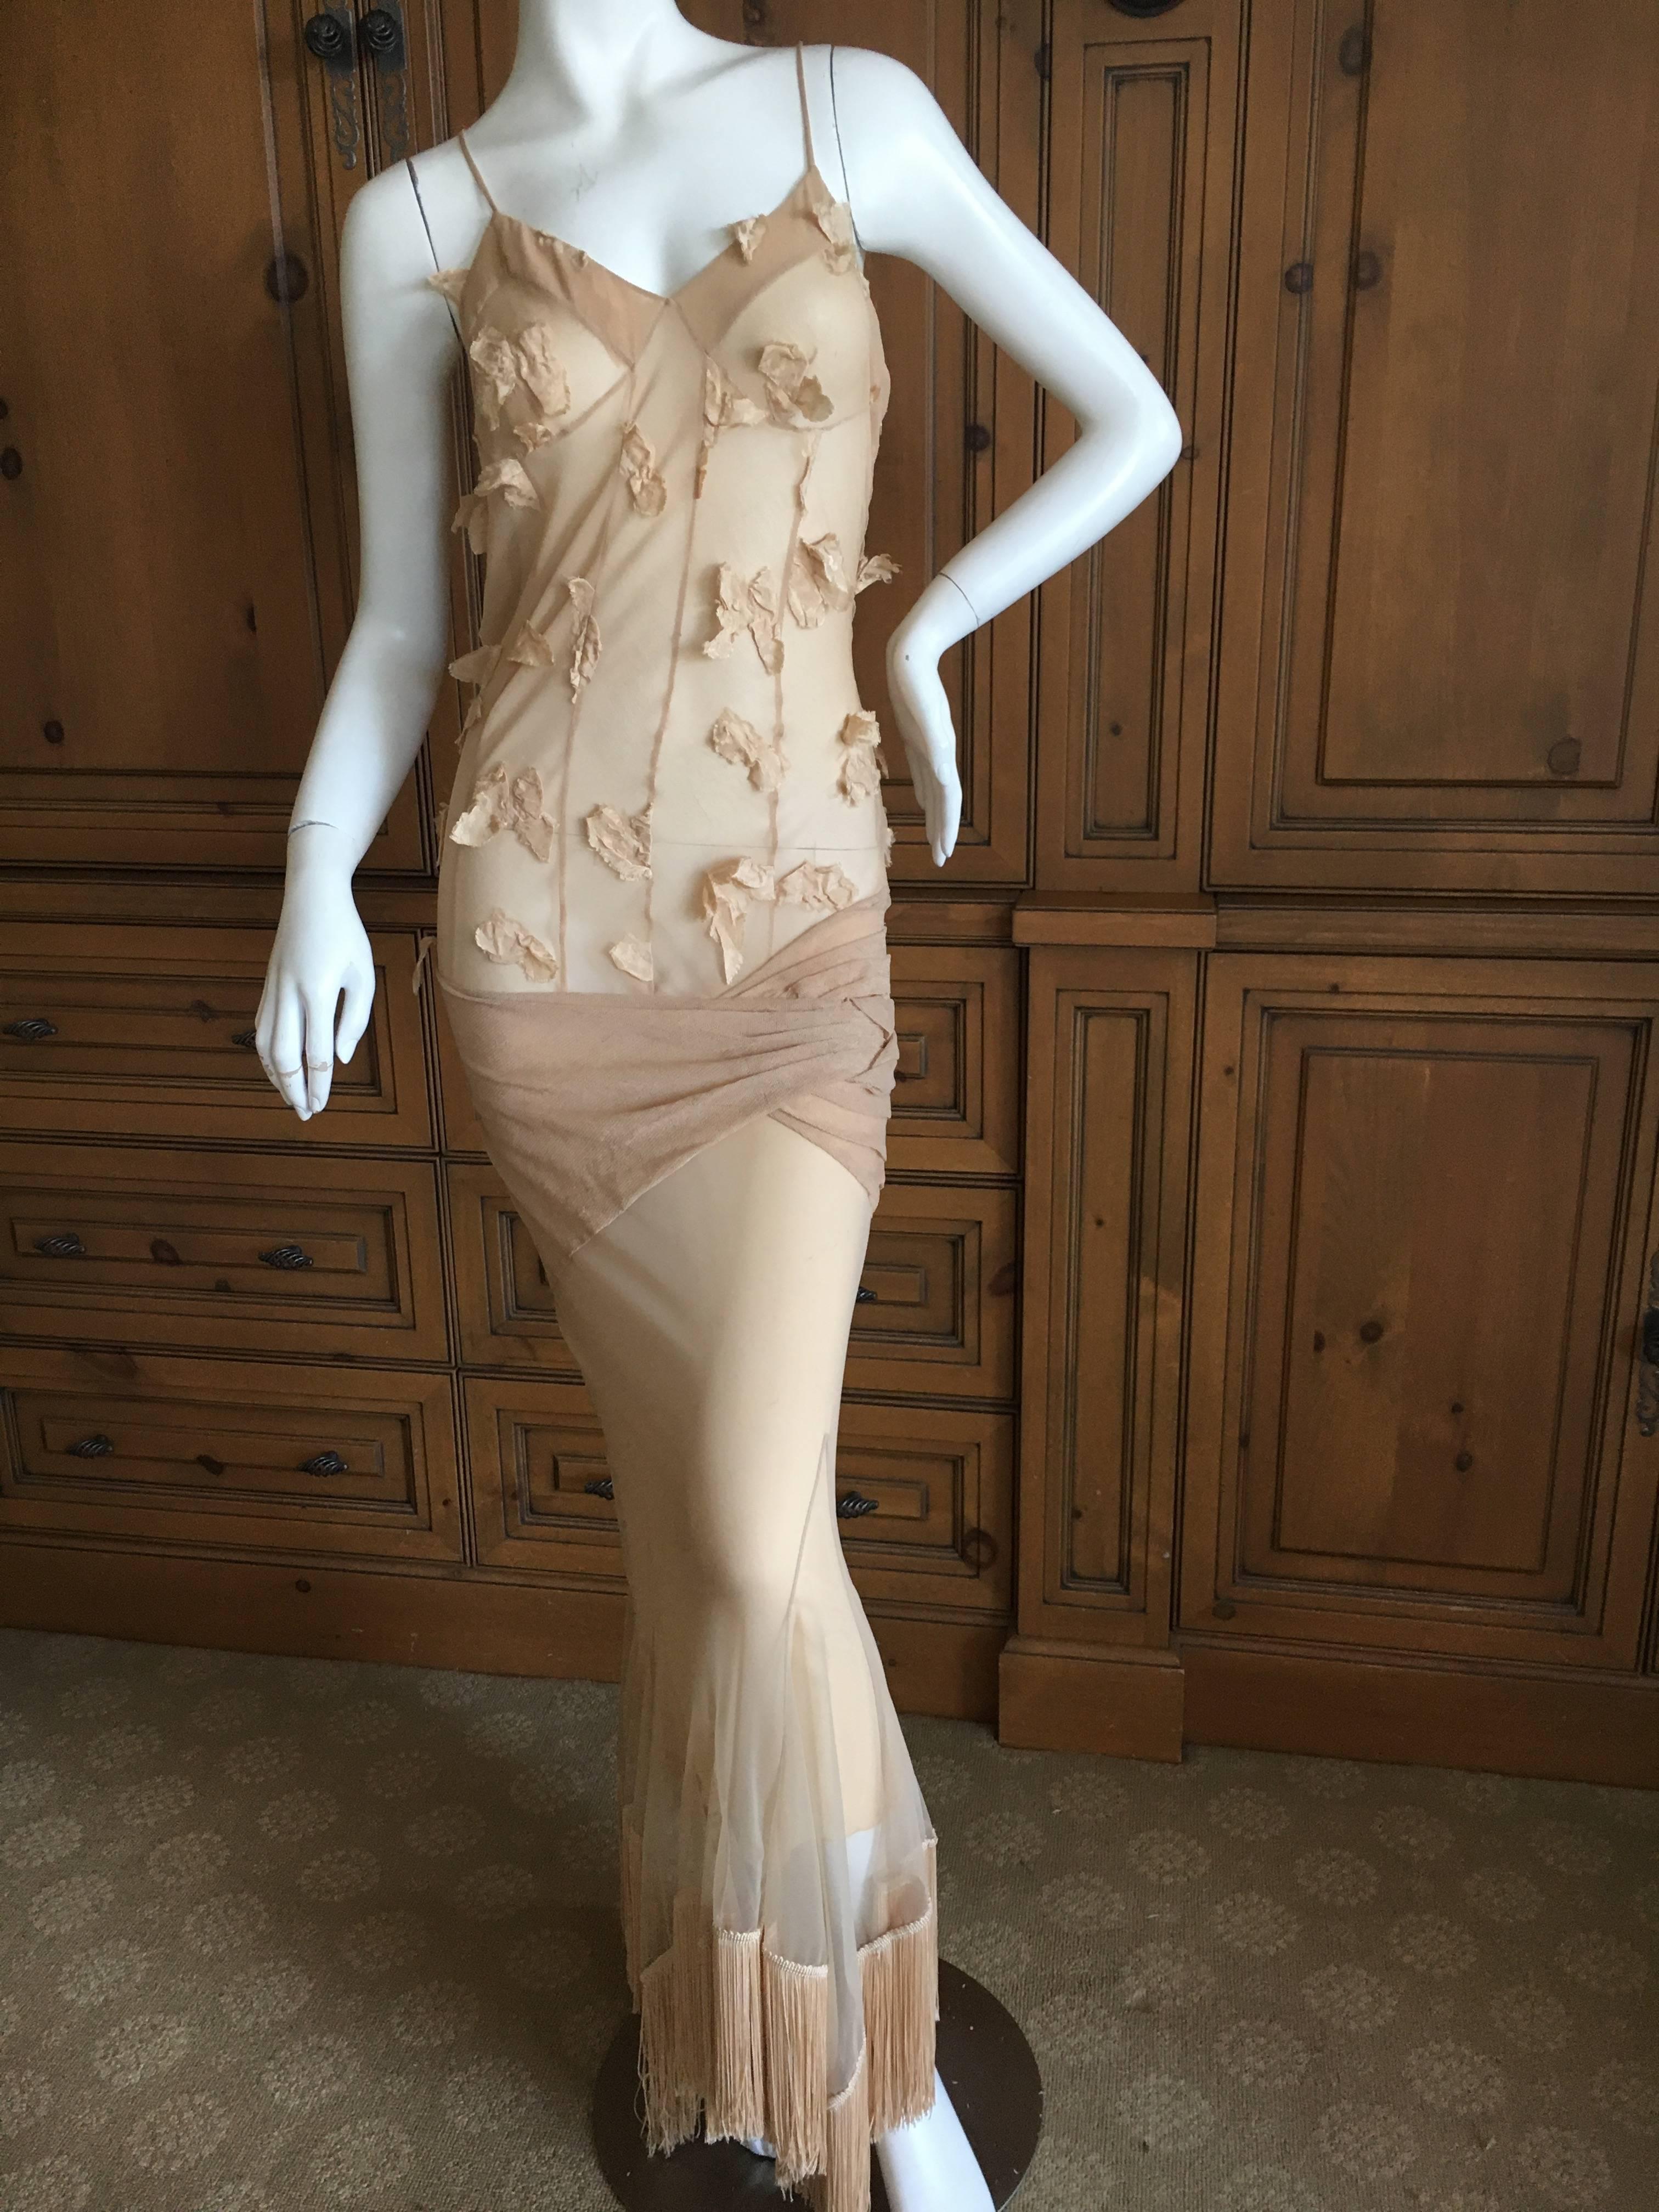 Christian Dior by John Galliano Sexy Sheer Nude Dress with Piano Finge Hem

Size  38

 Bust 38"

 Waist 30"

 Hips 38"

Length 60"

Excellent condition 